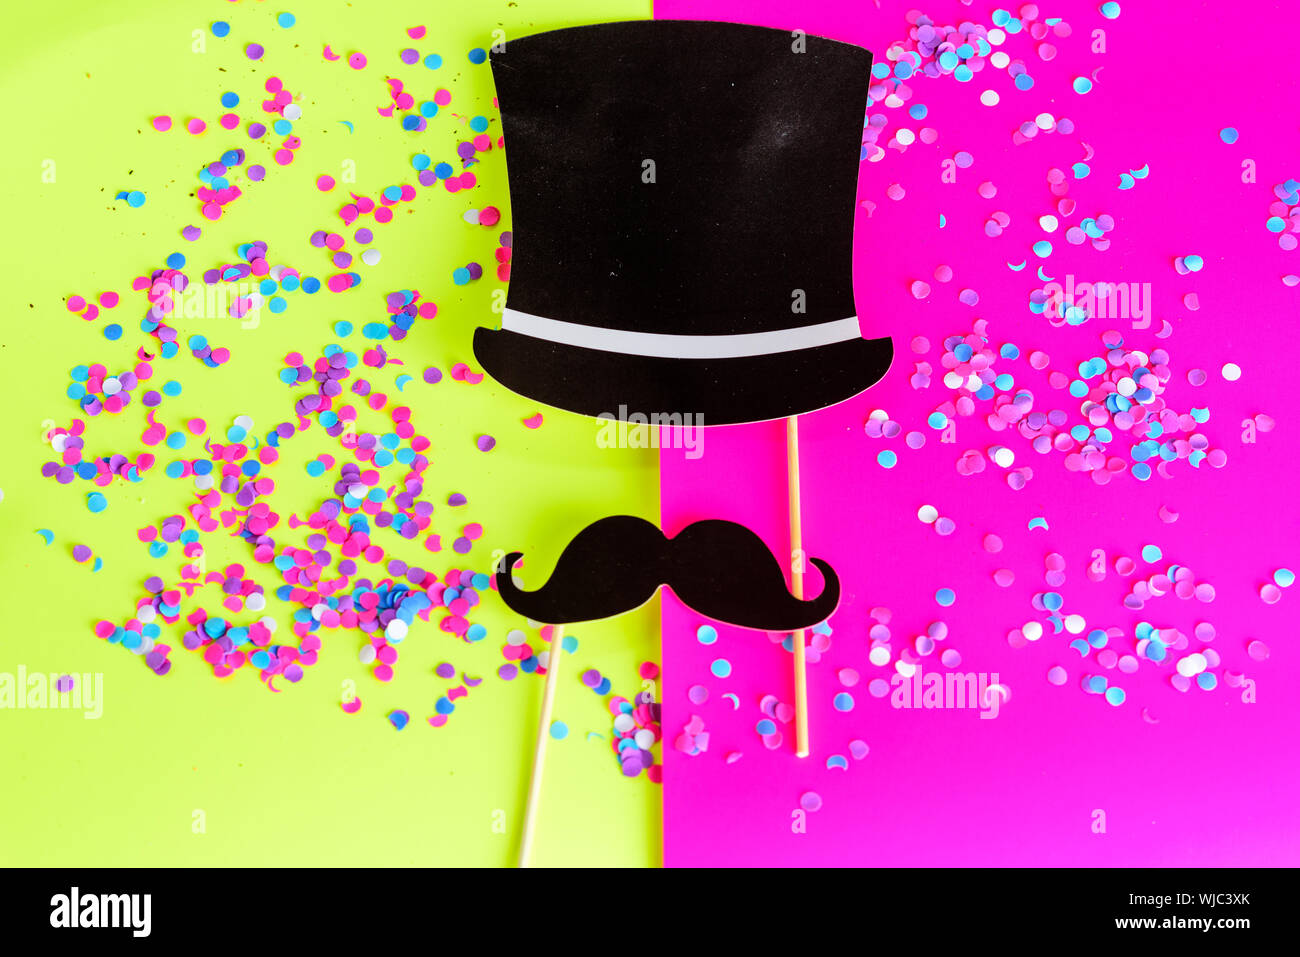 Icon of gentleman. Design with mustache and black hat on bright background with multicolored confetti. Flat design.Invitation on party or Happy Father's Day greeting card. Stock Photo